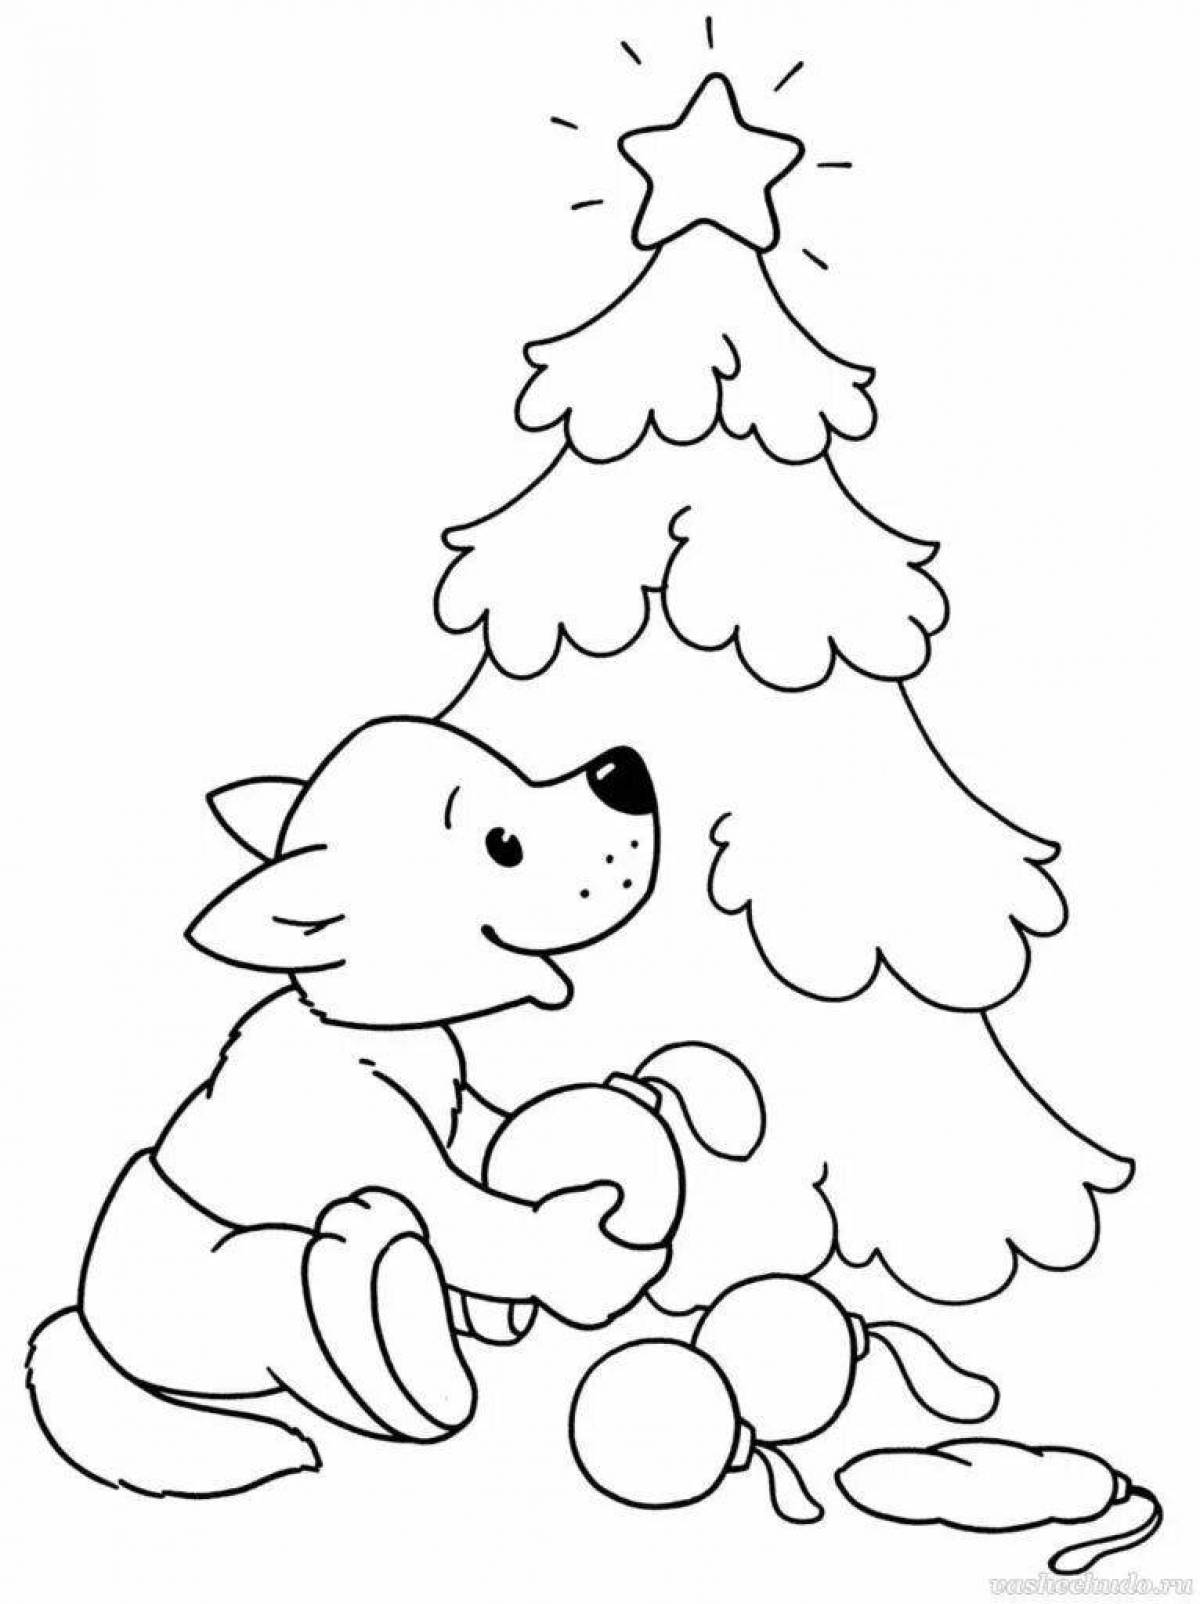 Awesome wolf Christmas coloring book